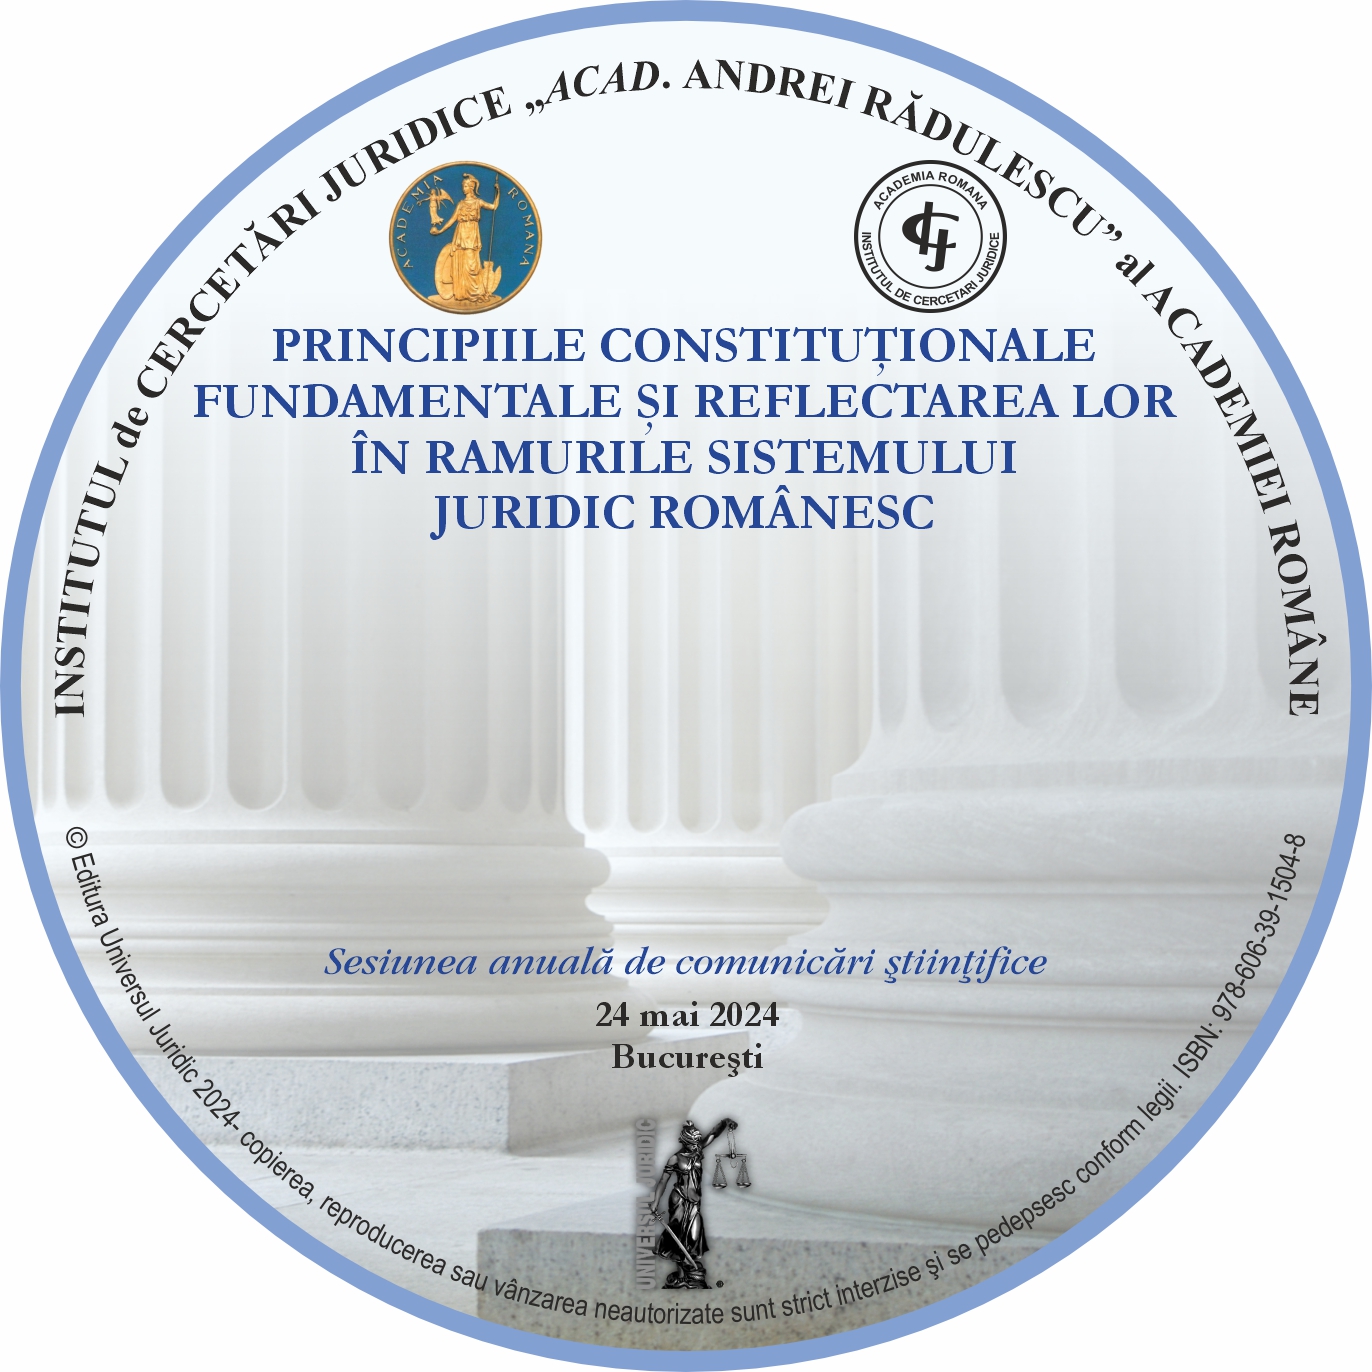 The fundamental constitutional principles and their reflection in the branches of the Romanian legal system